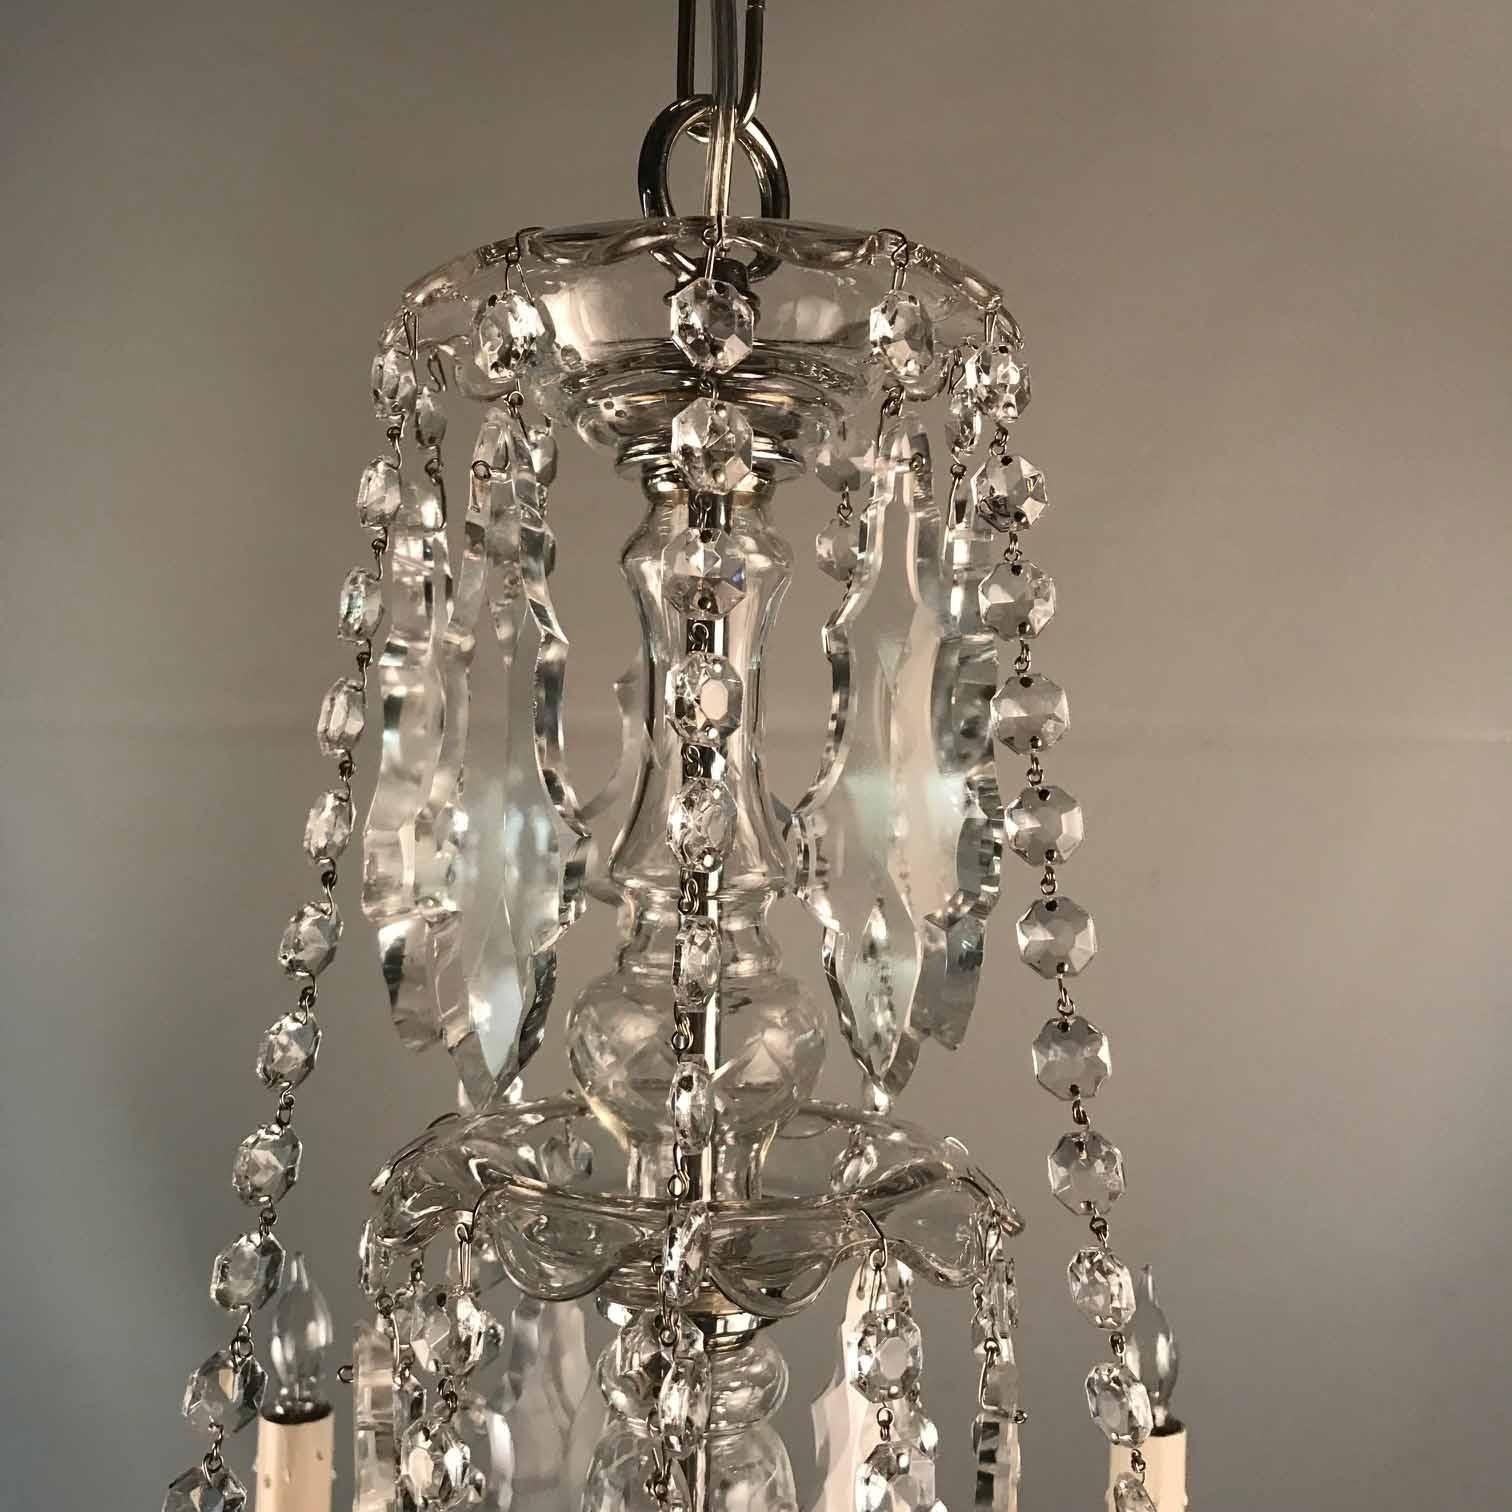 This chandelier is of a date when much handwork was still the norm. The actual glass is unusually brilliant. It is hung with swags of cut beads and decorated with variations of French style pendants. Unusually the central pendant finial is modeled